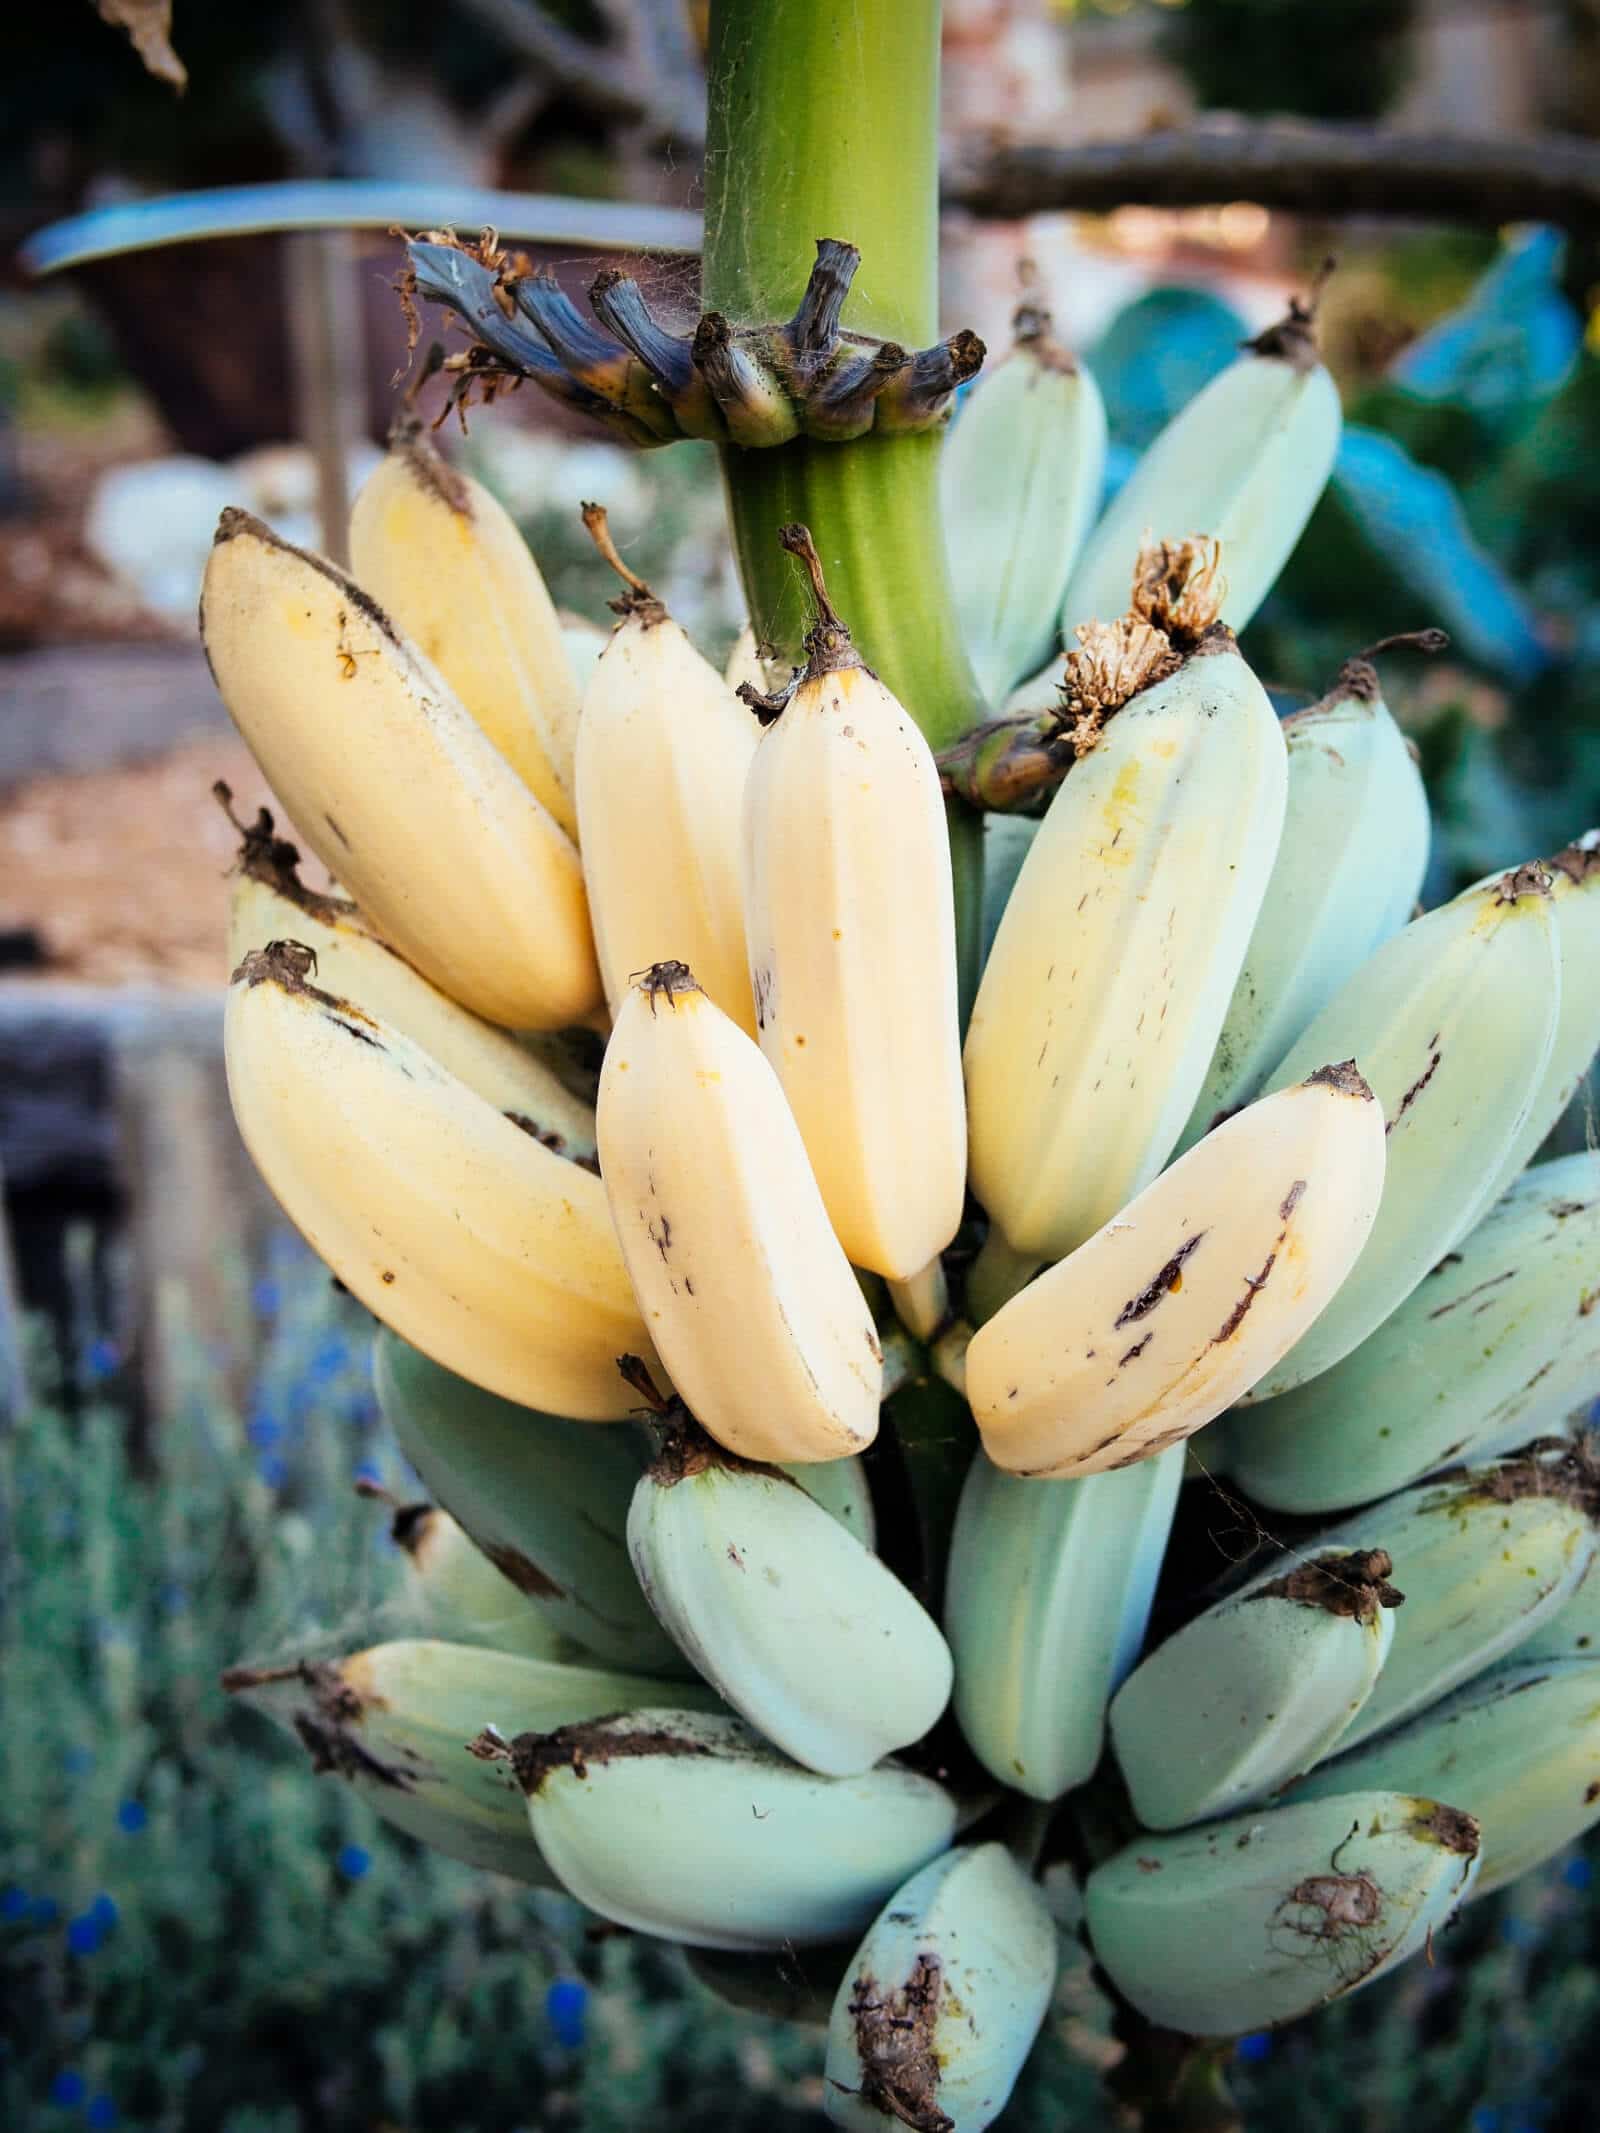 Bananas are herbaceous perennials and can fruit year-round in warm climates